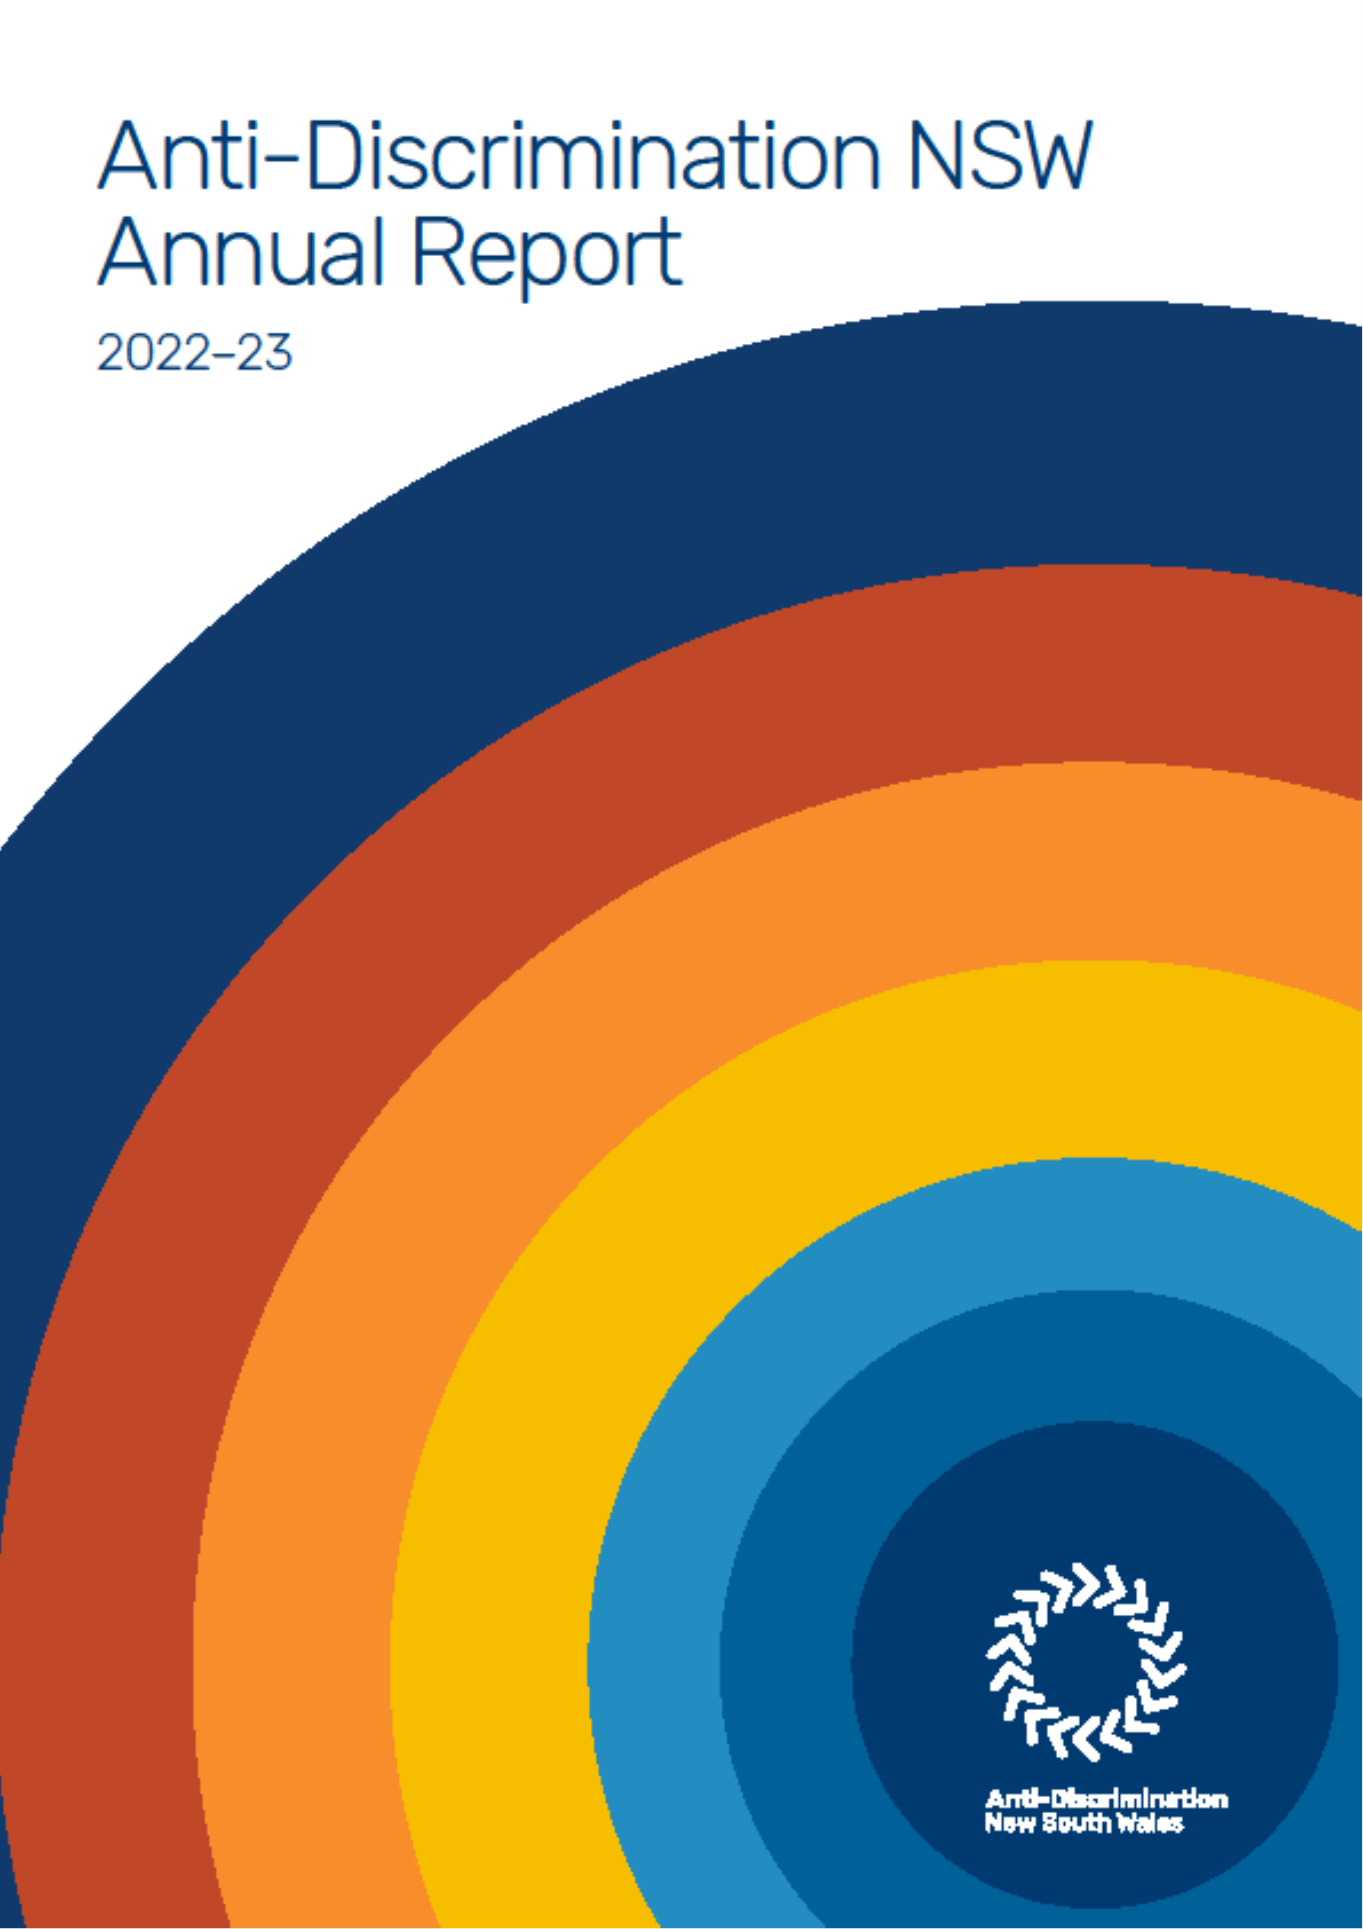 Screenhot of annual report cover - abstart image of circles in brand colours